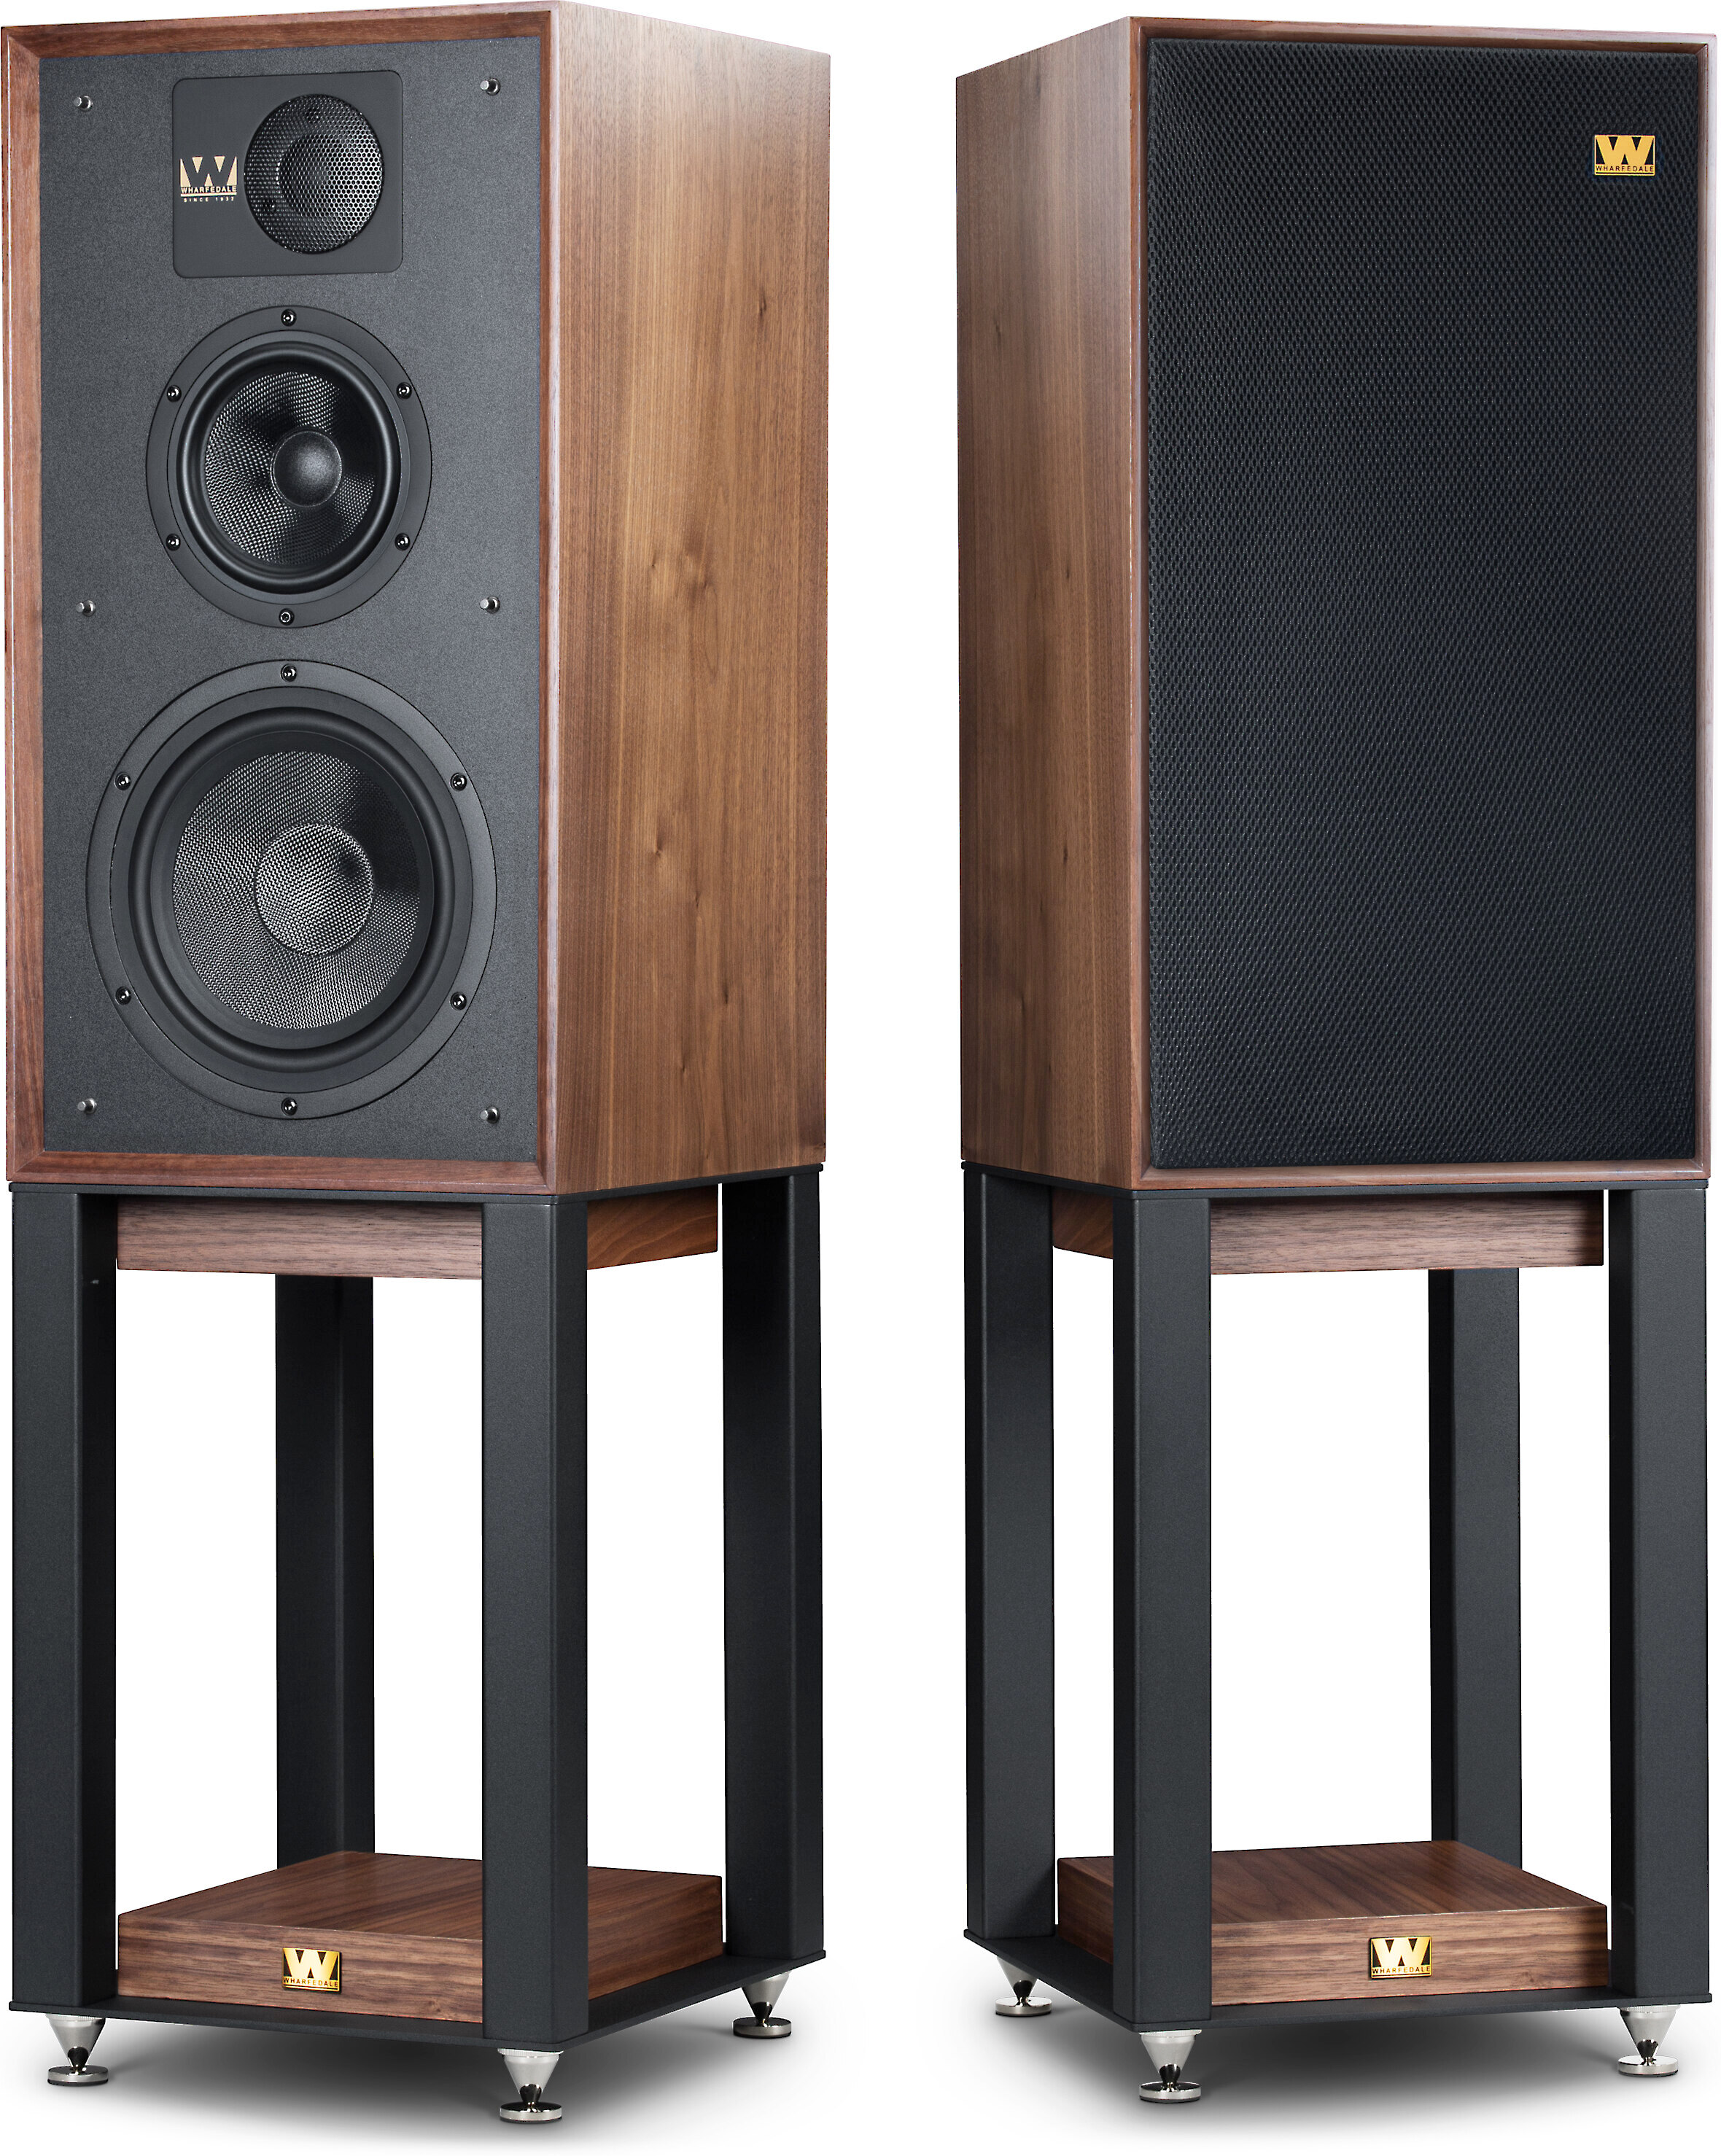 Matched　Reviews:　speakers　stand-mount　at　of　with　Wharfedale　stands　LINTON　speaker　Heritage　pair　(Walnut)　Customer　Crutchfield